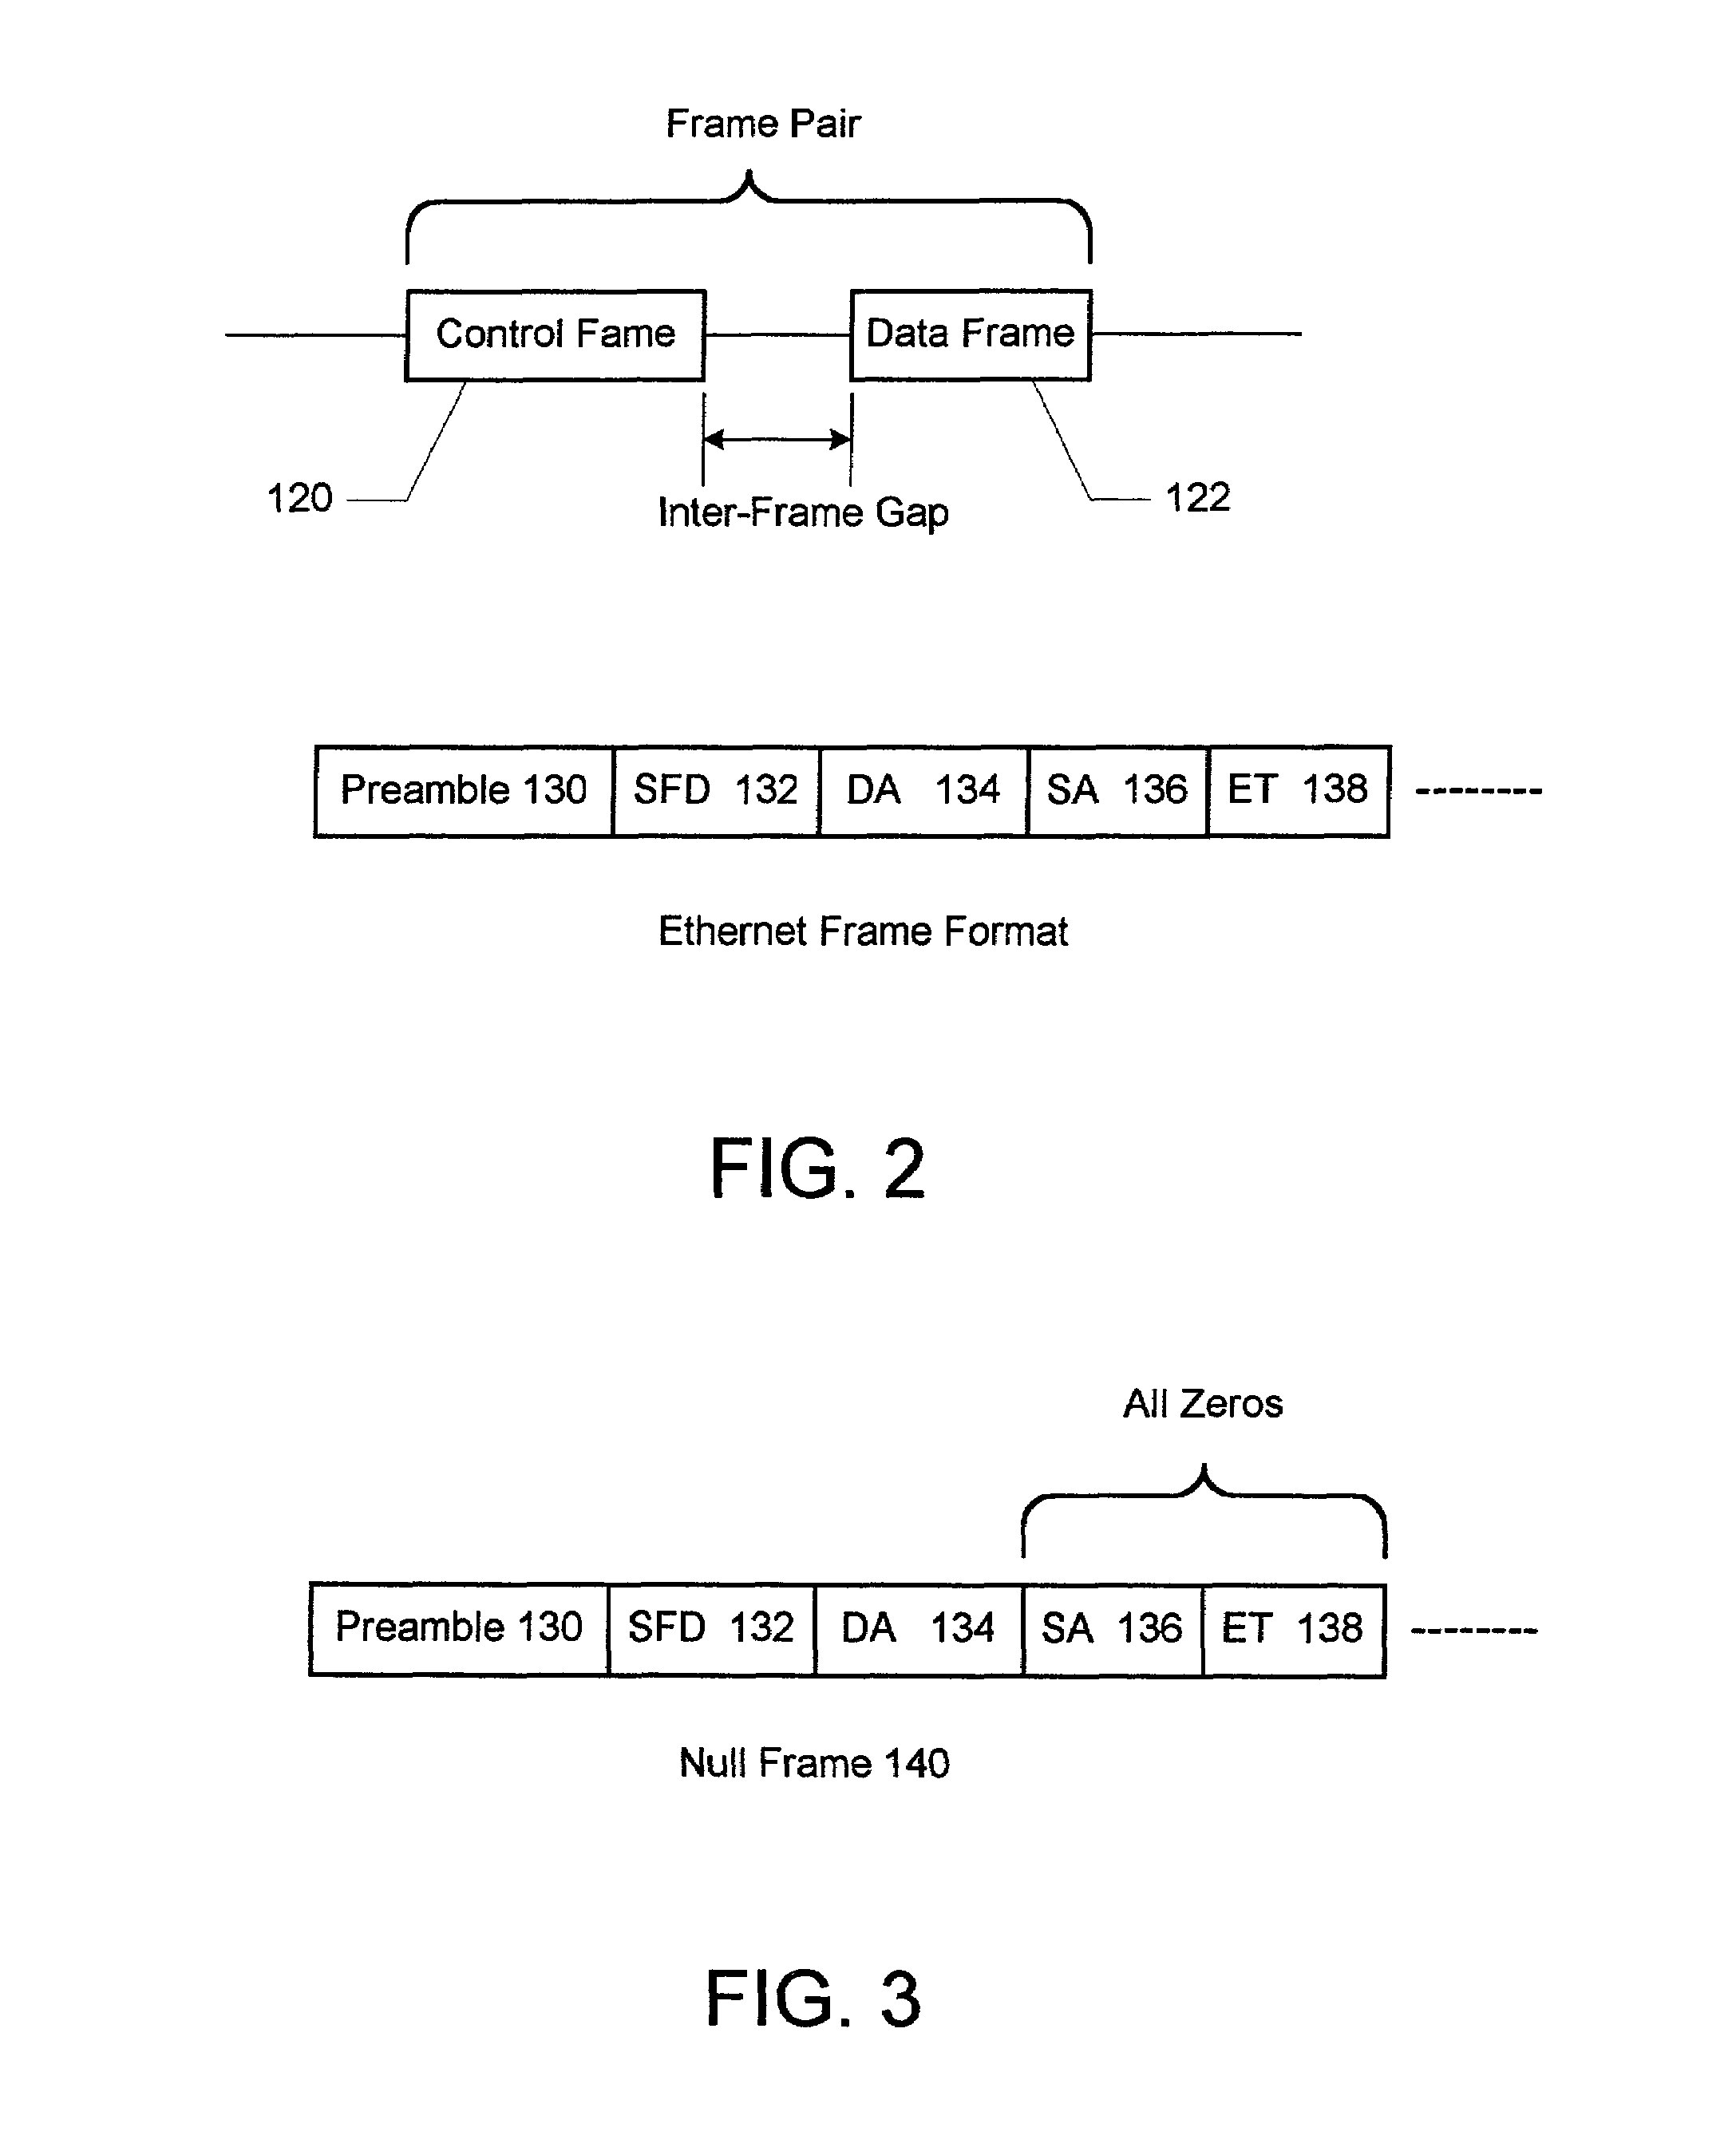 Maintaining synchronization between frame control word and data frame pairs in a home network